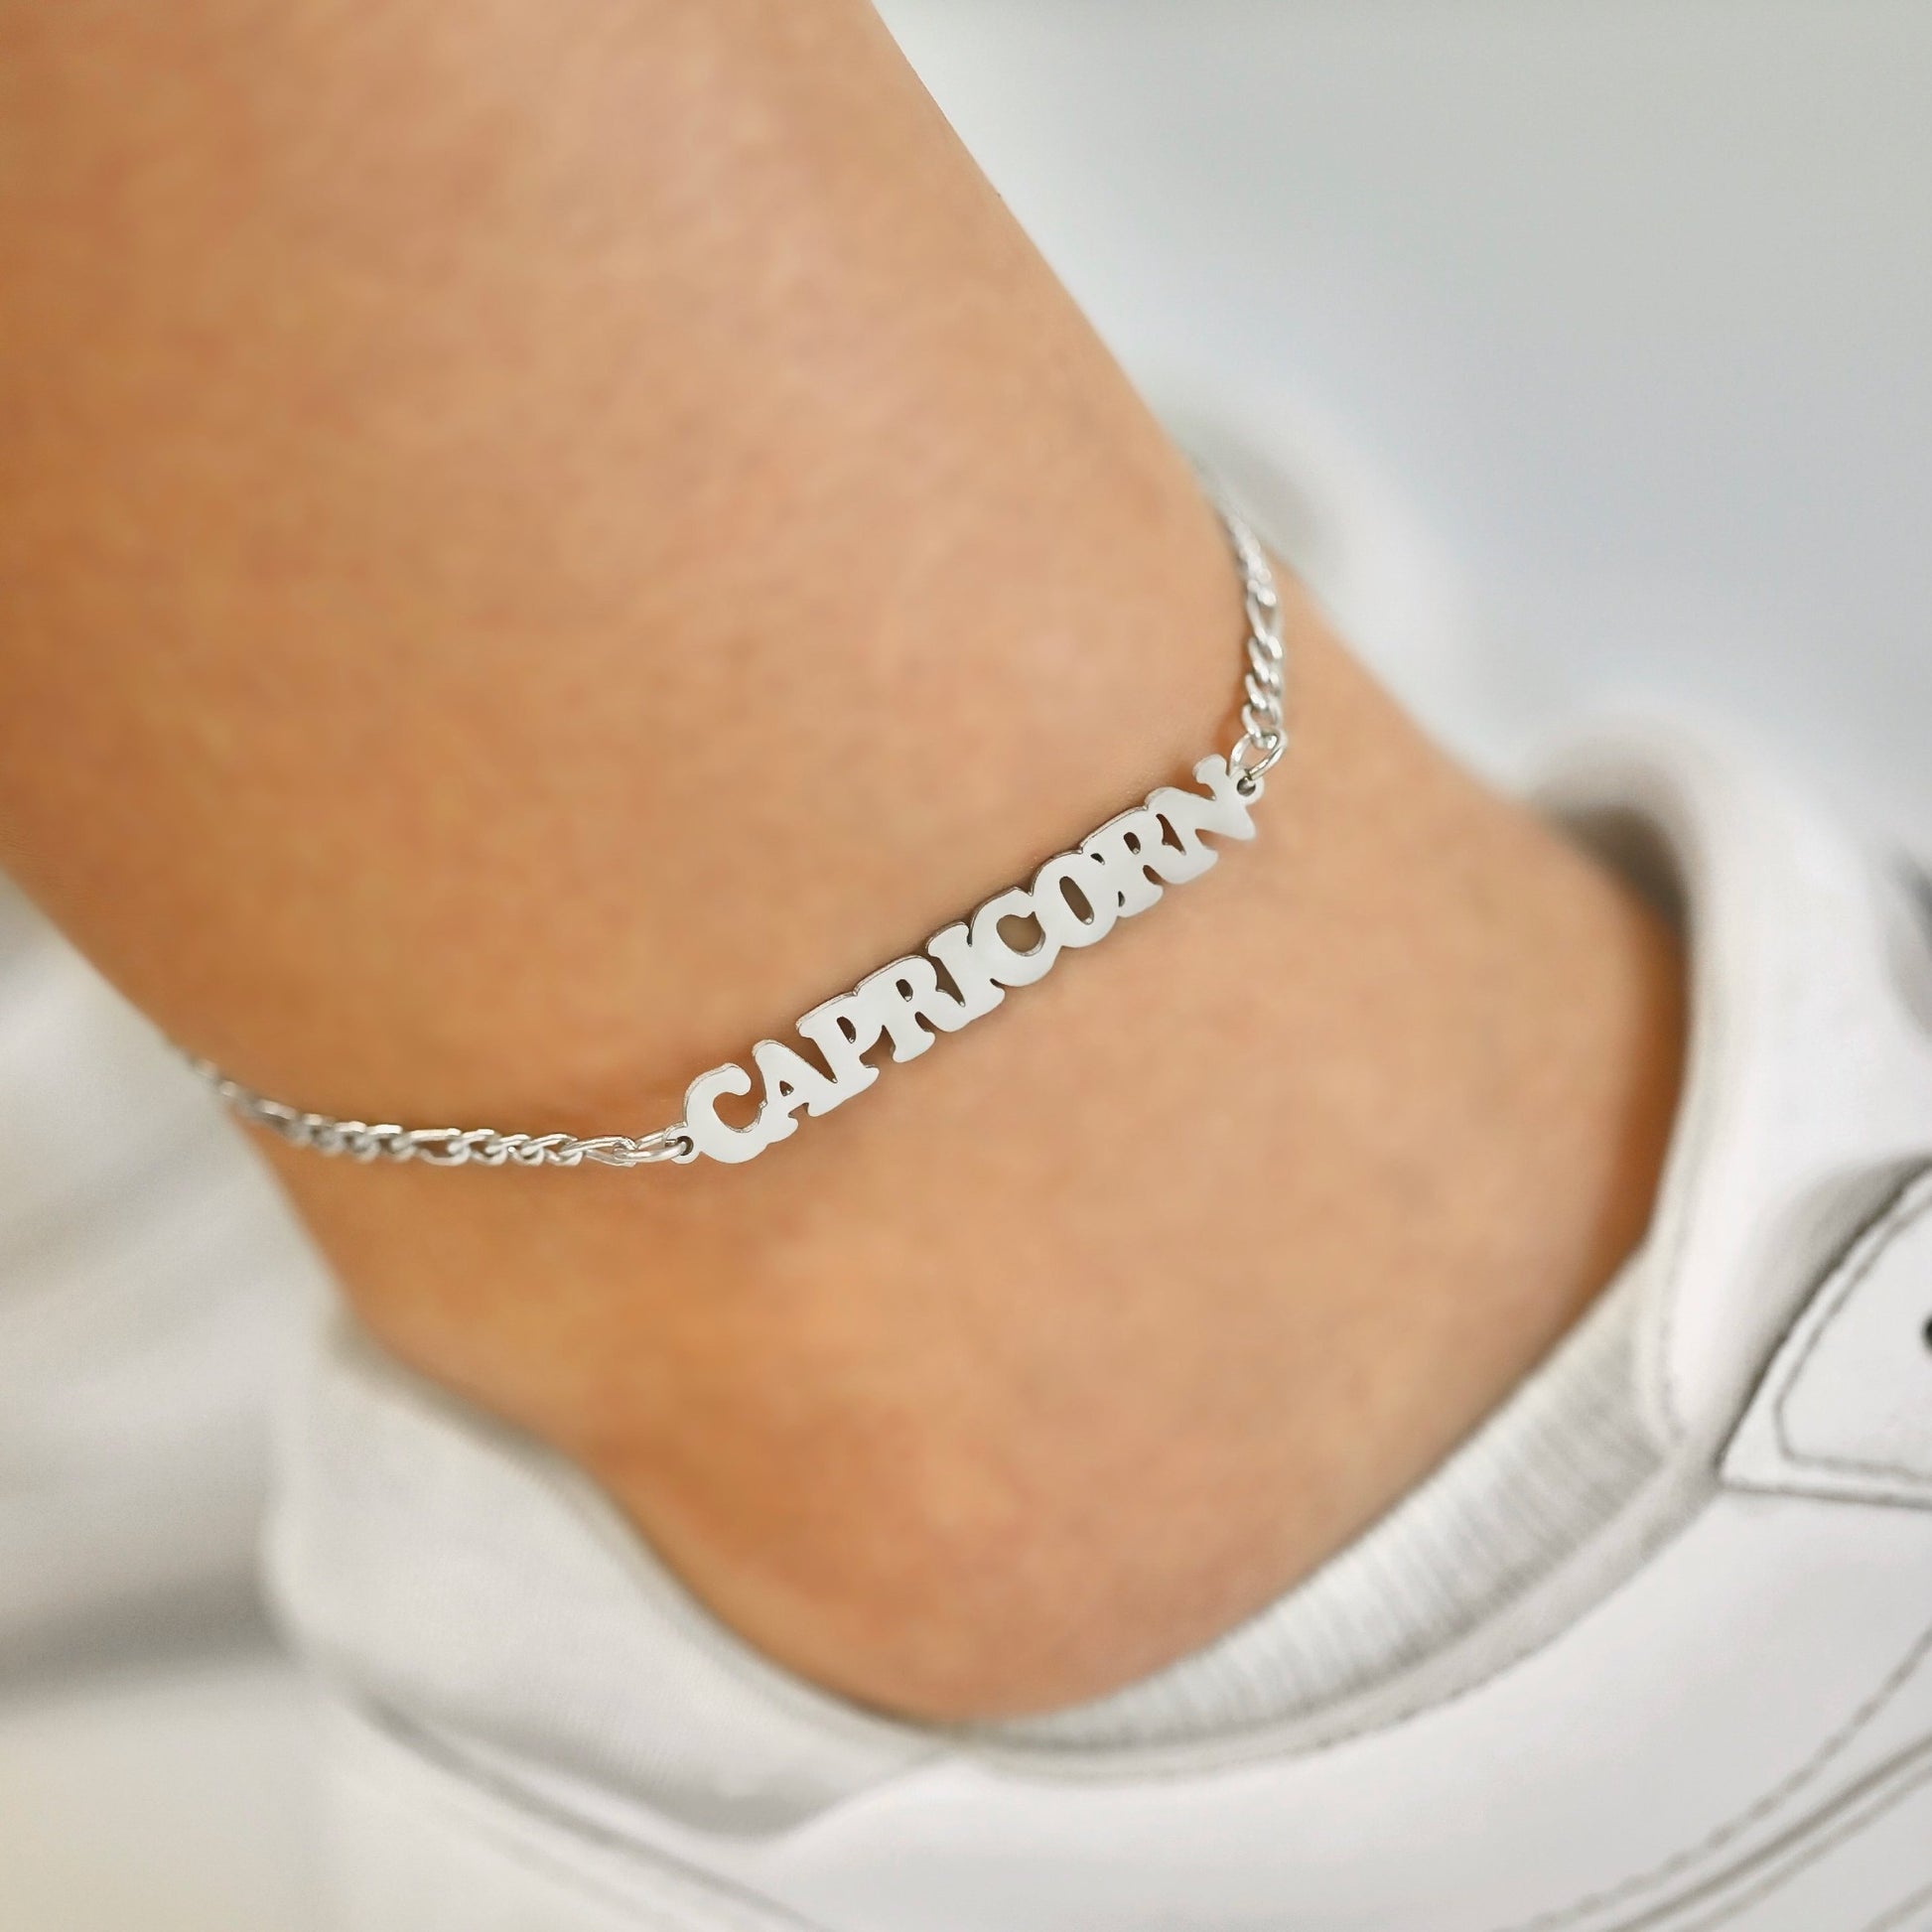 – Capricorn Shipping Department Anklet